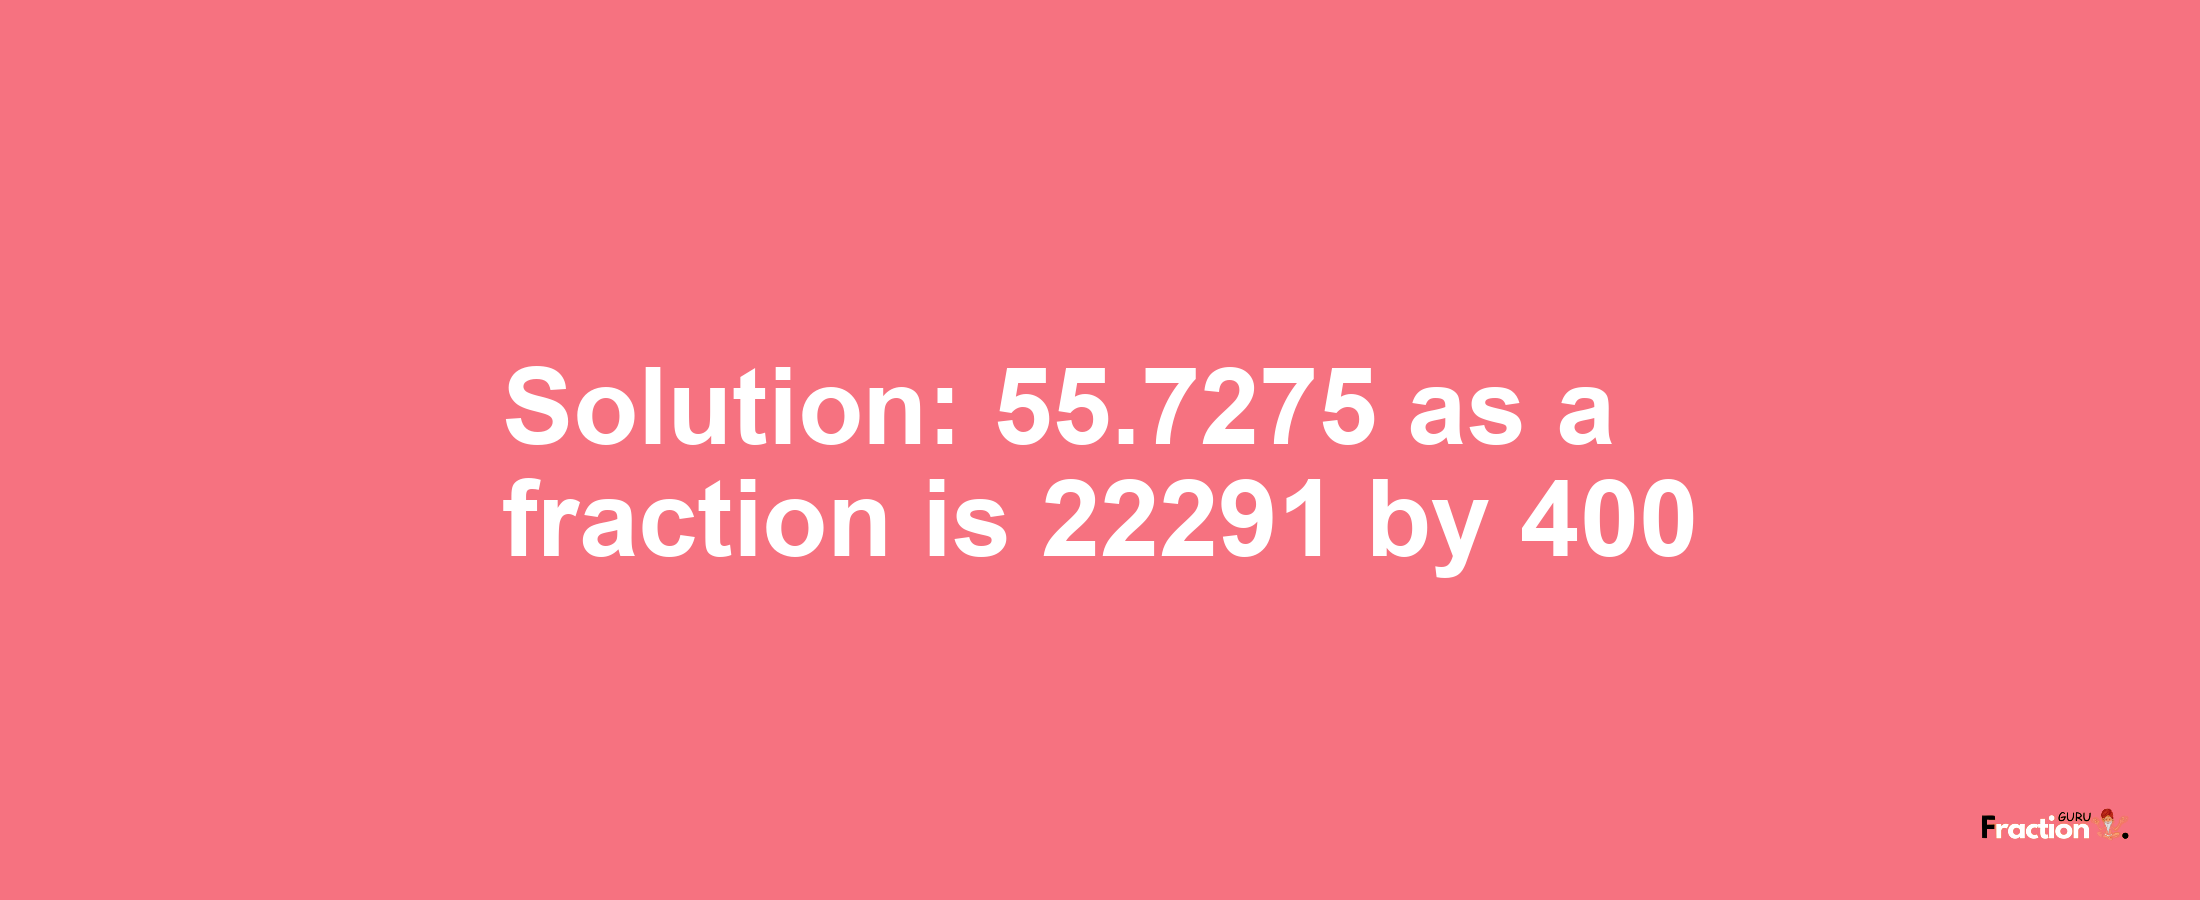 Solution:55.7275 as a fraction is 22291/400